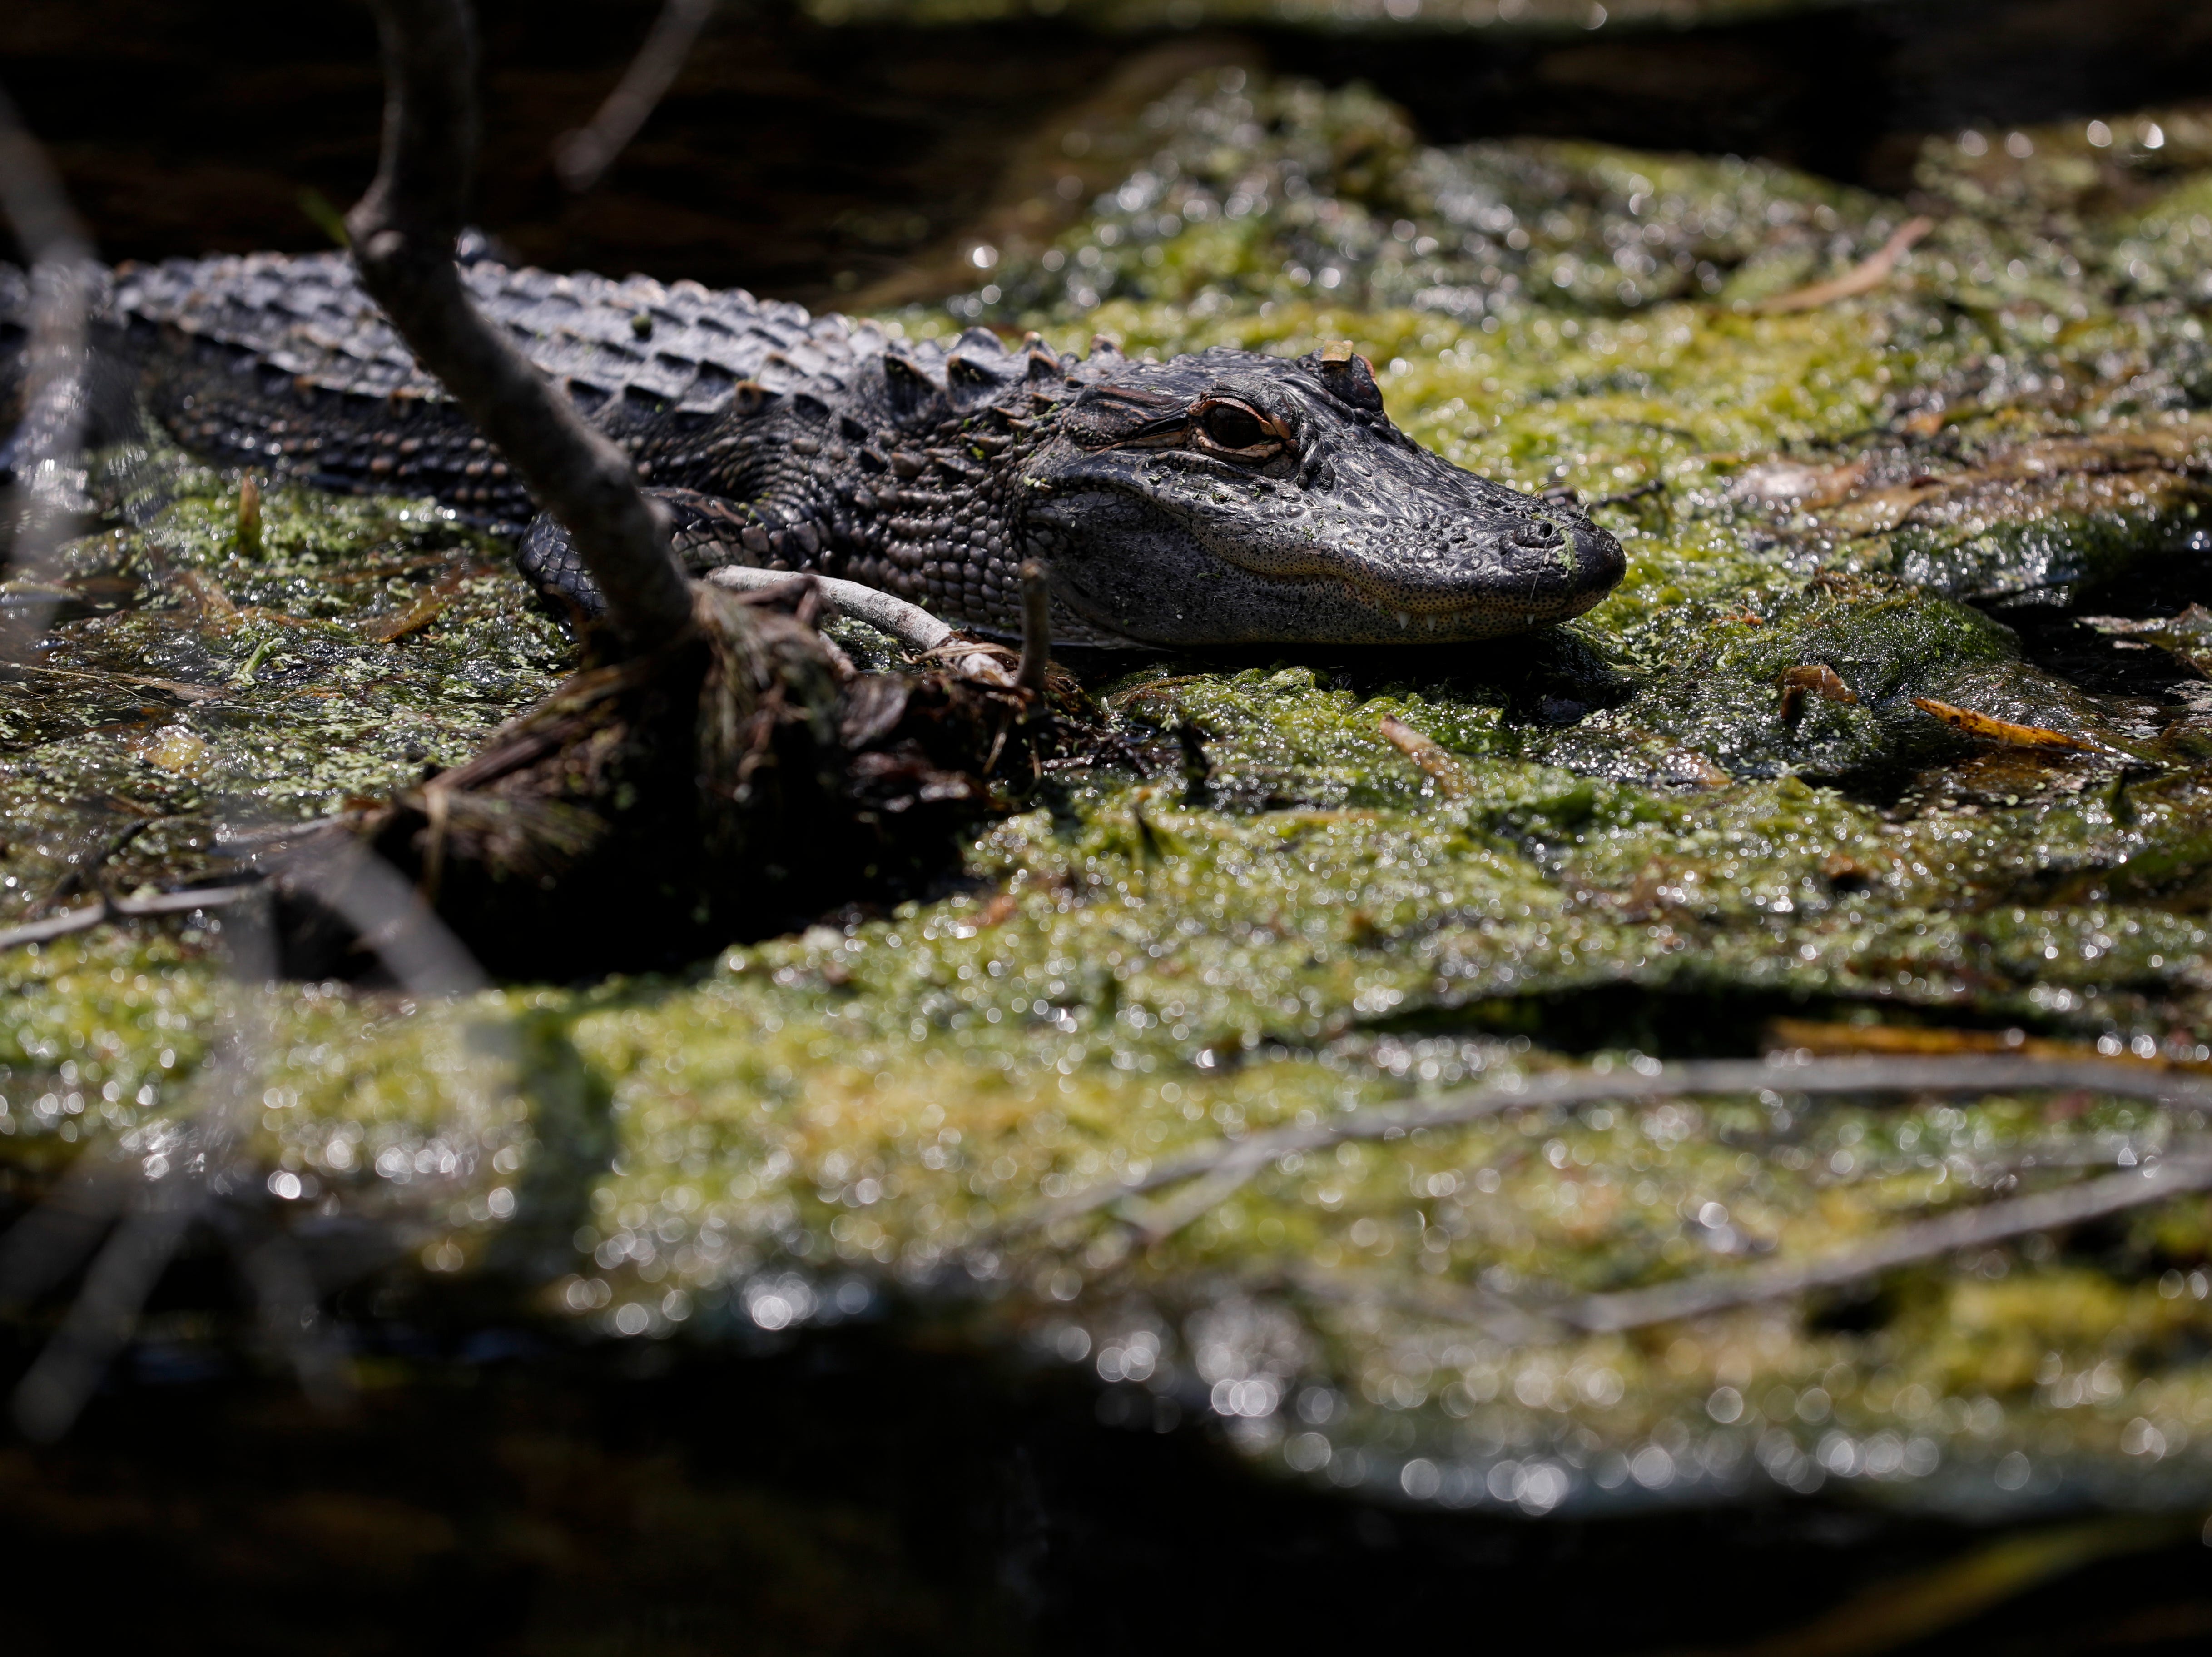 A young alligator sunbathes along the shores of the Wakulla Spring.